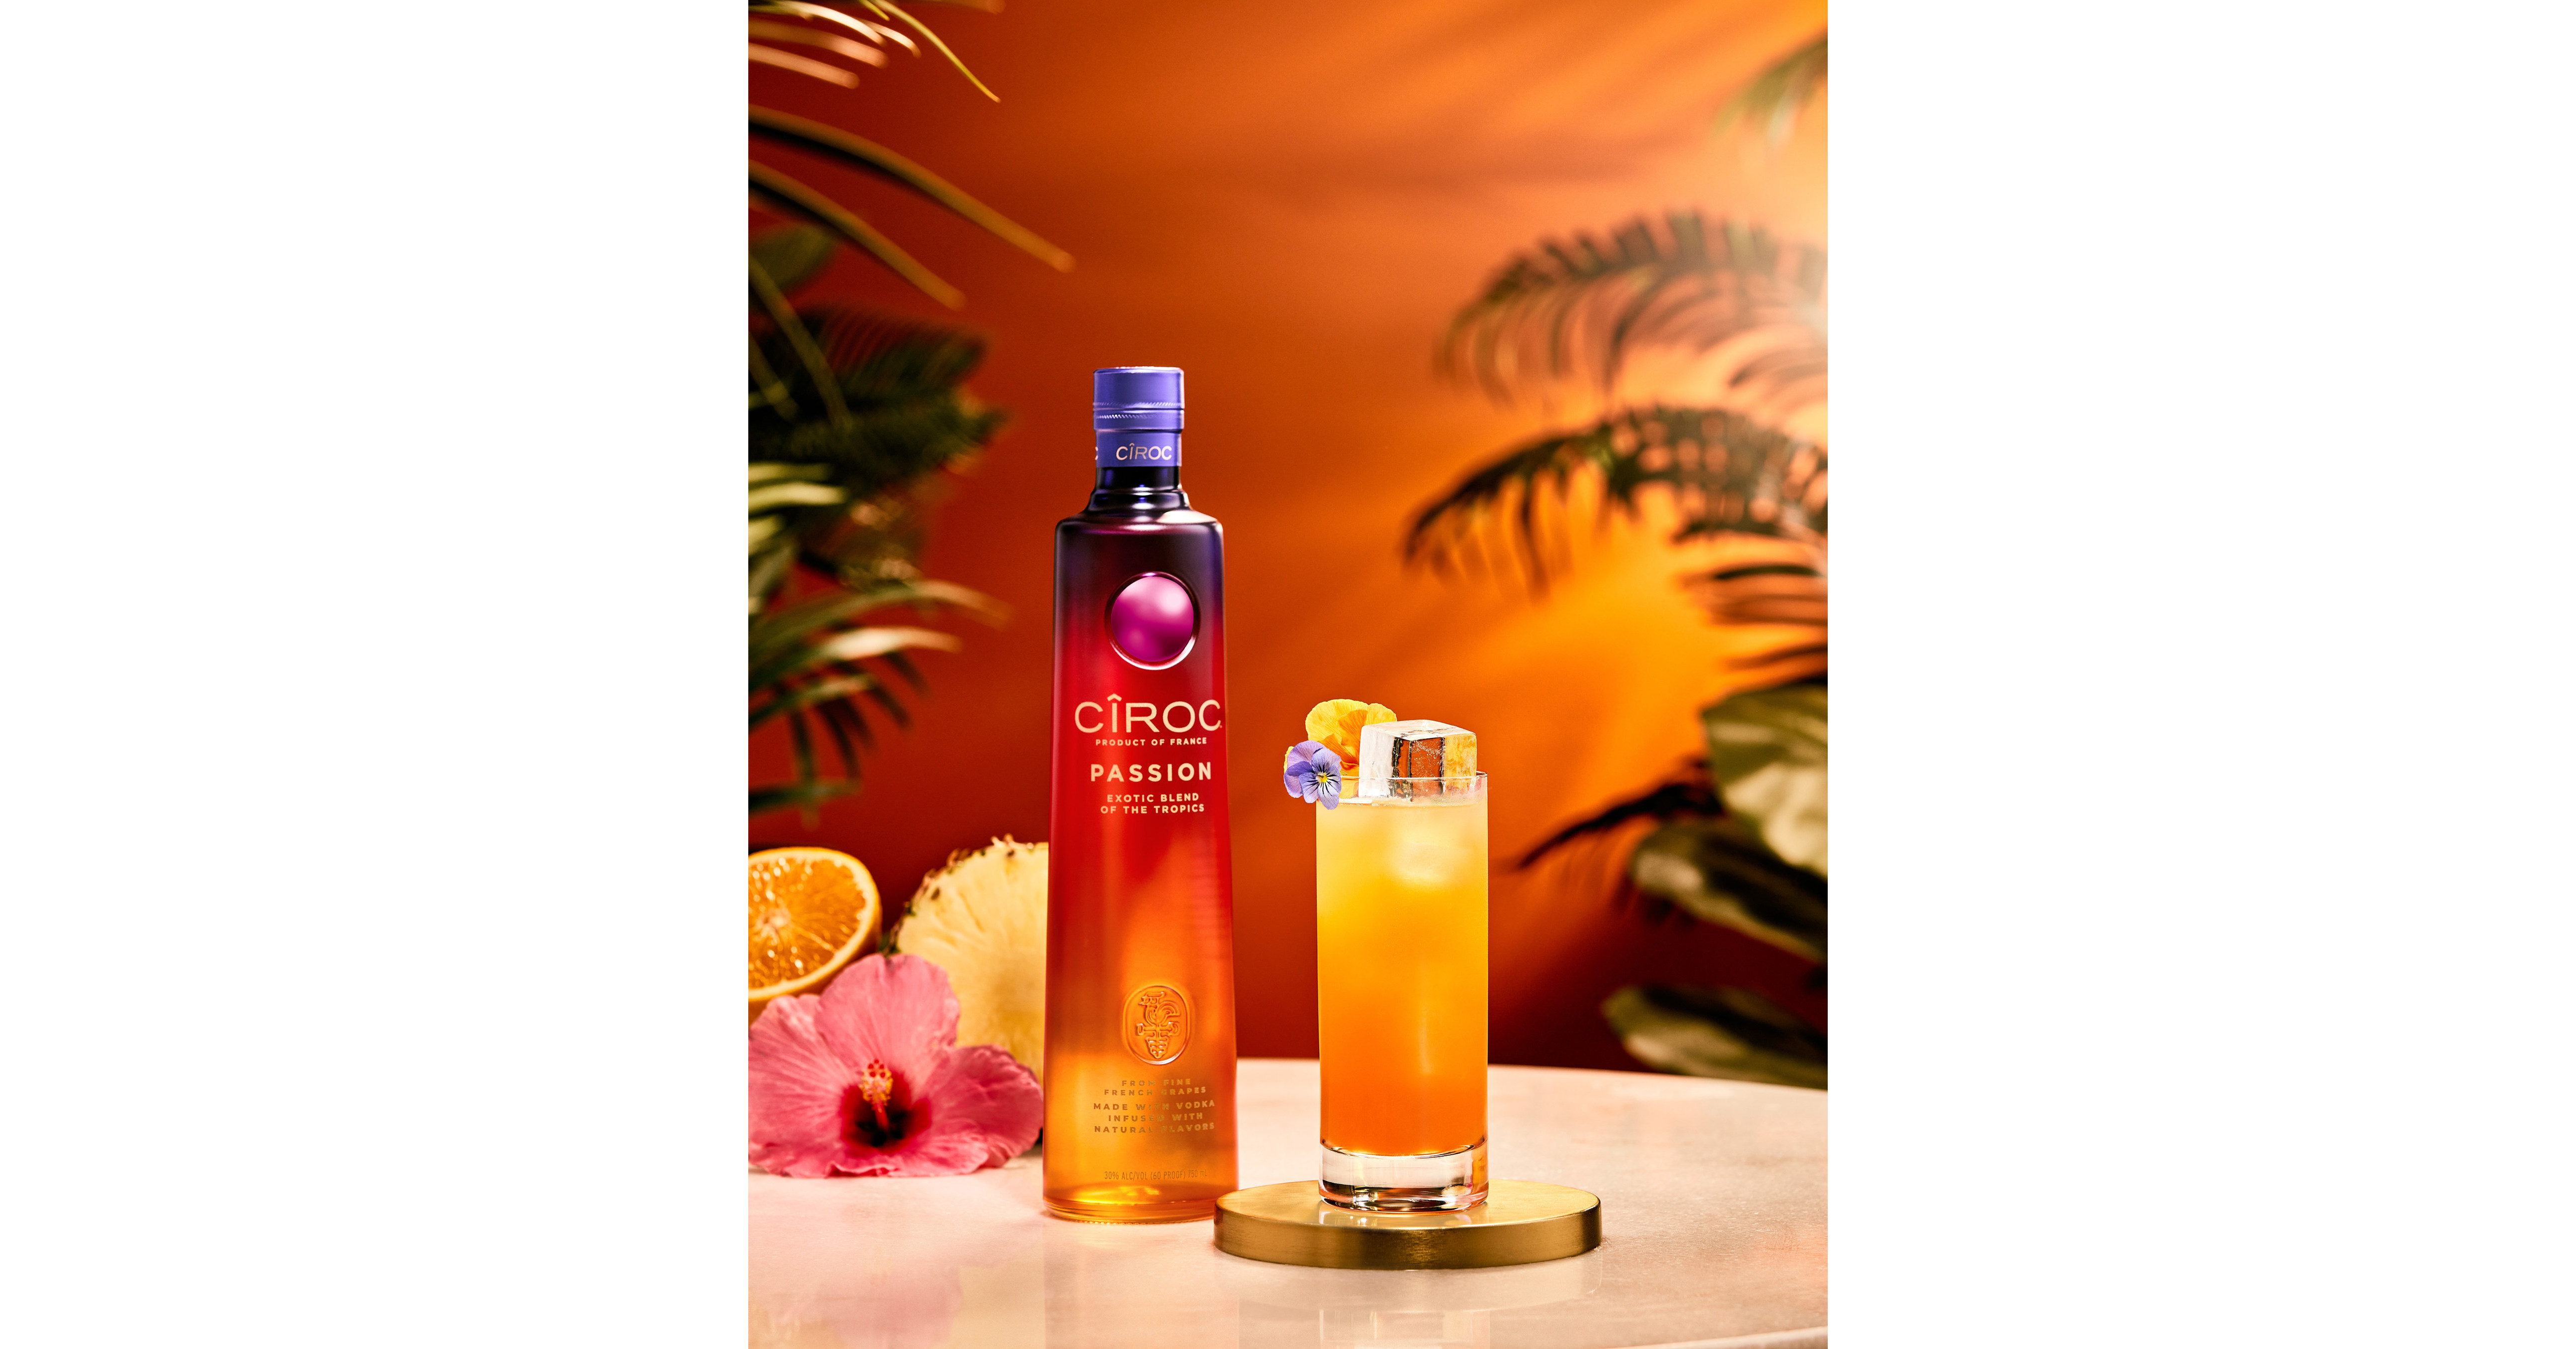 WOW NEW Ciroc Passion!!! JAKE FEVER Review #cirocpassion #ciroc 